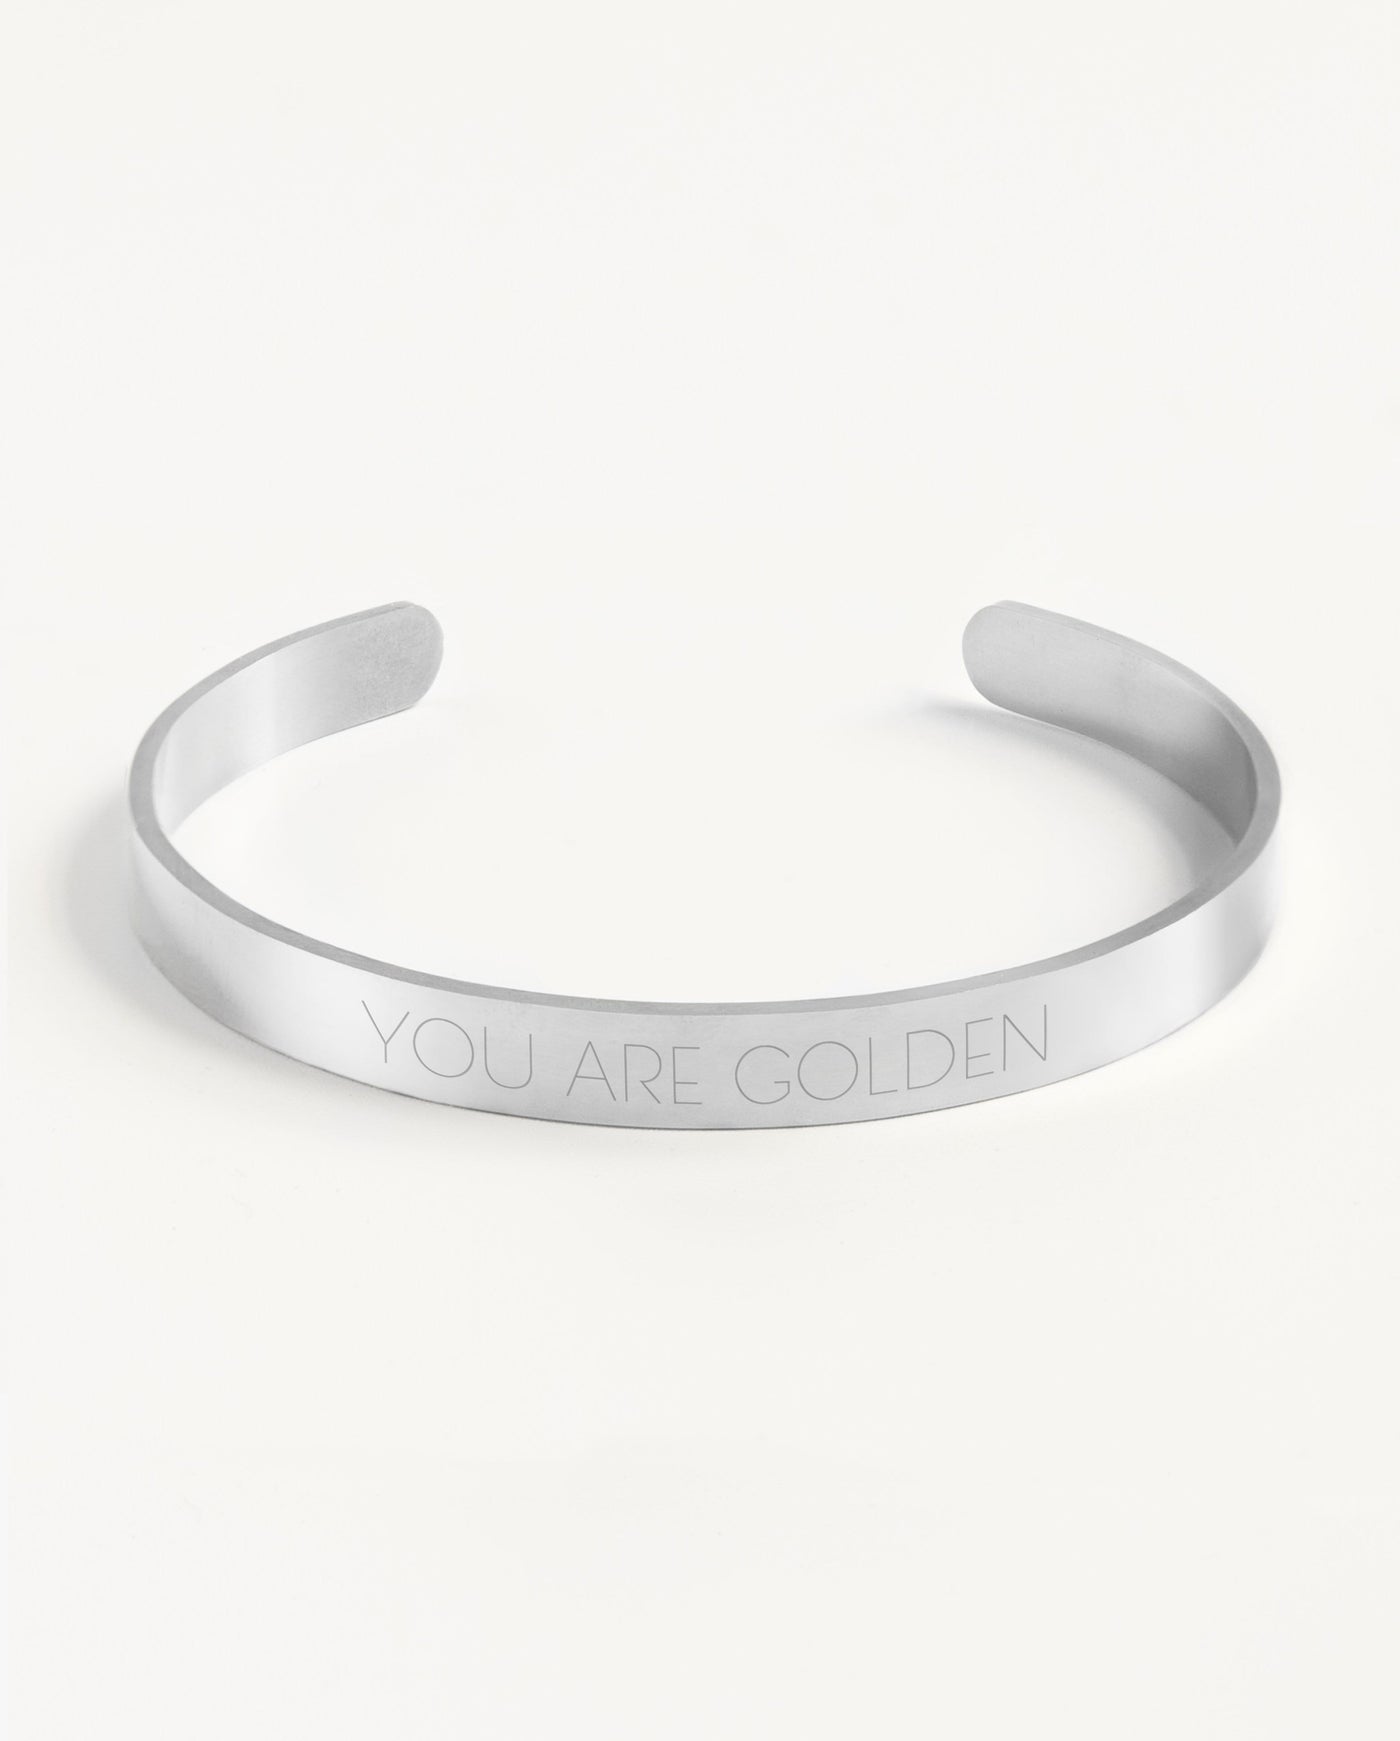 Shiny bangle Statement - You are golden